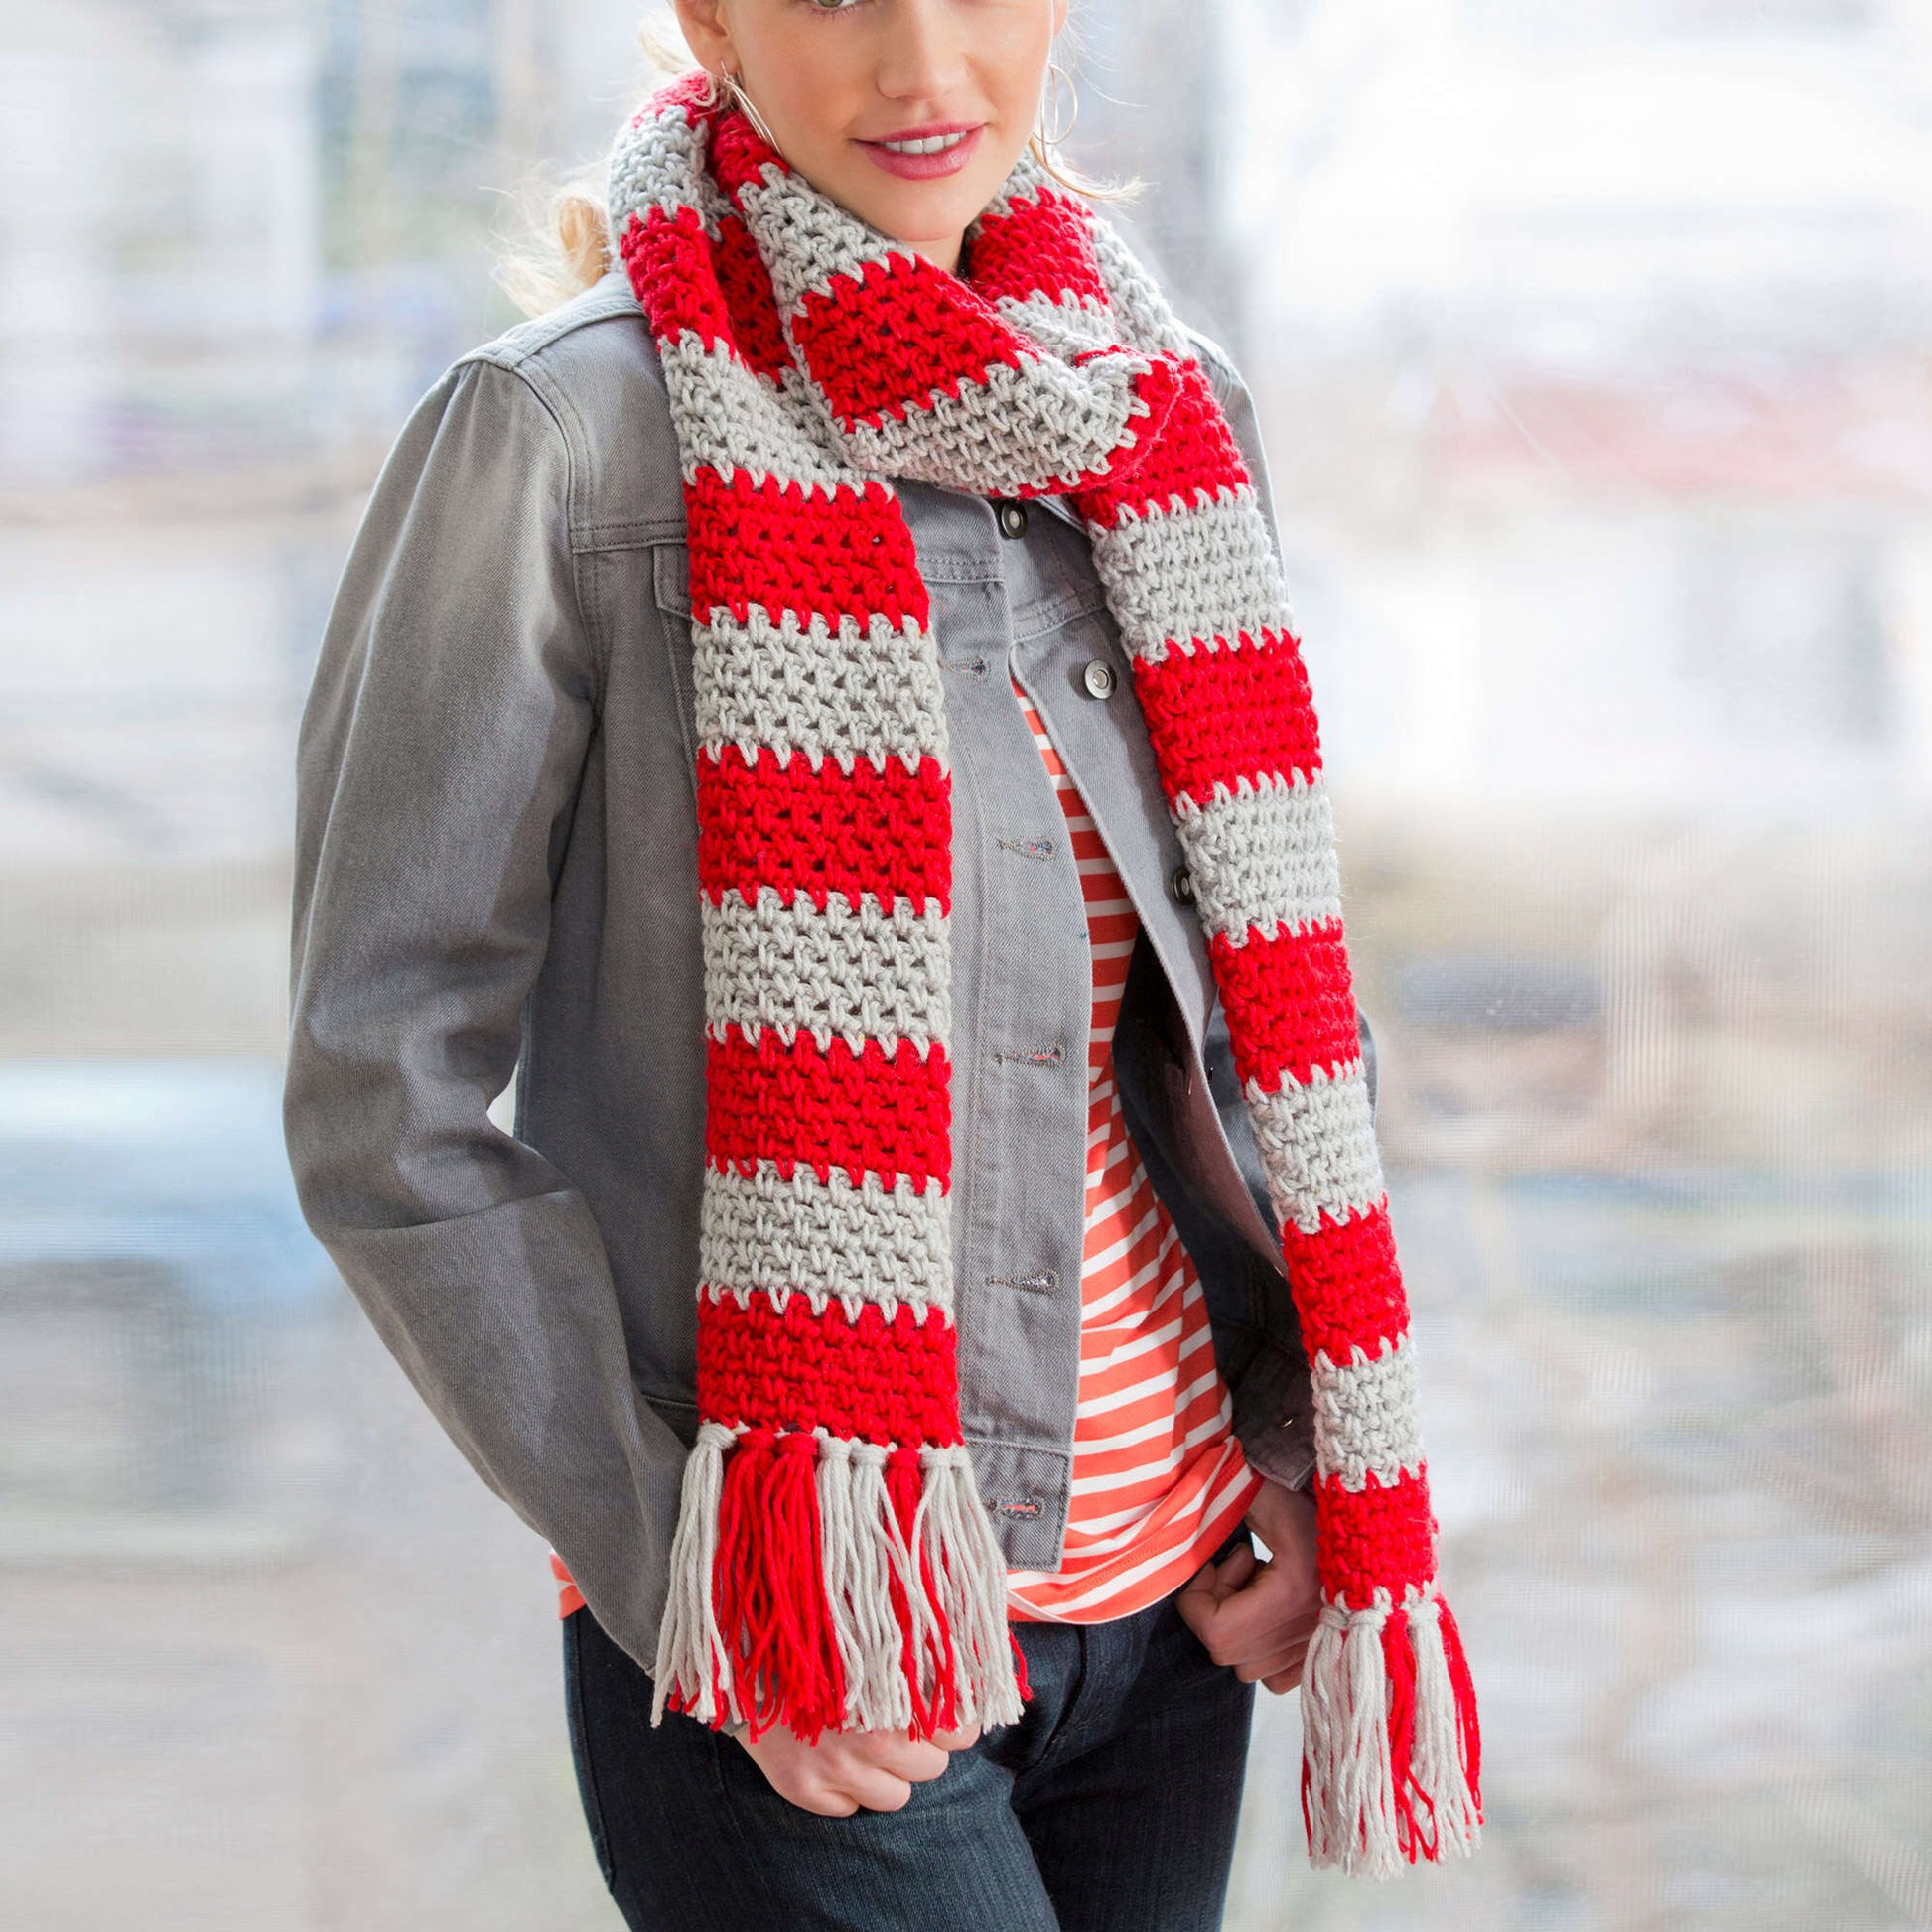 Free Red Heart My Team Forever Scarf Crochet Pattern